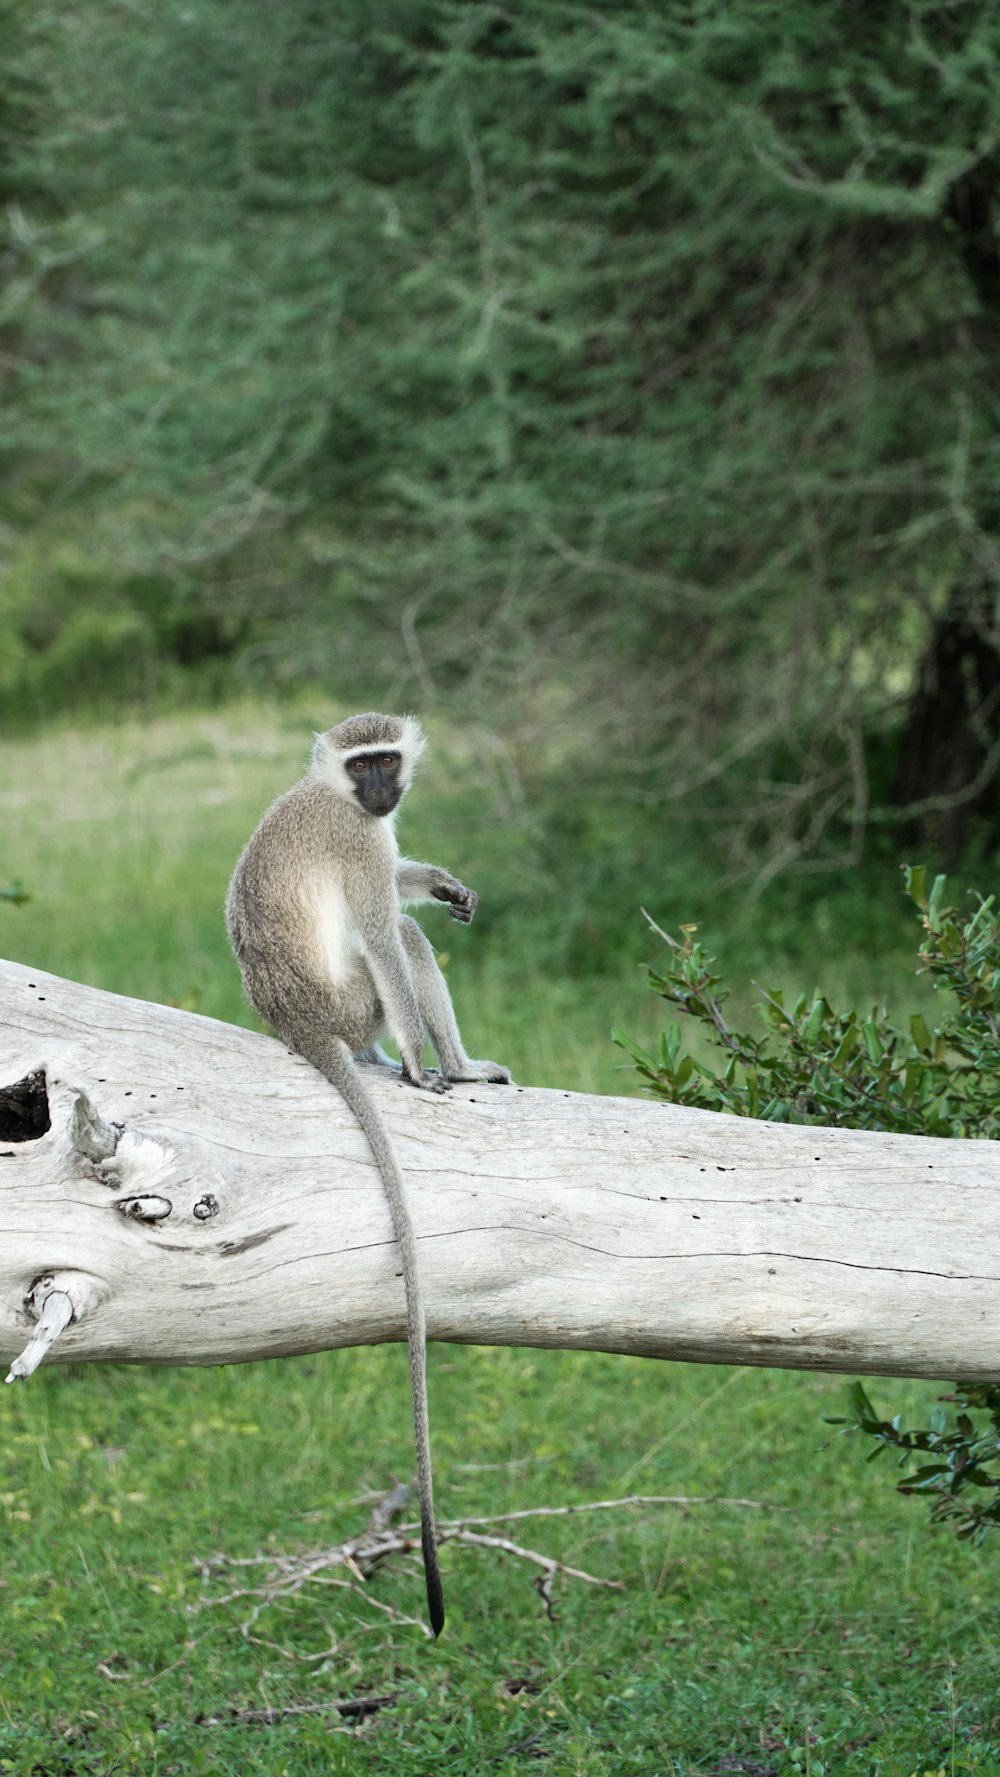 a monkey that is sitting on a log